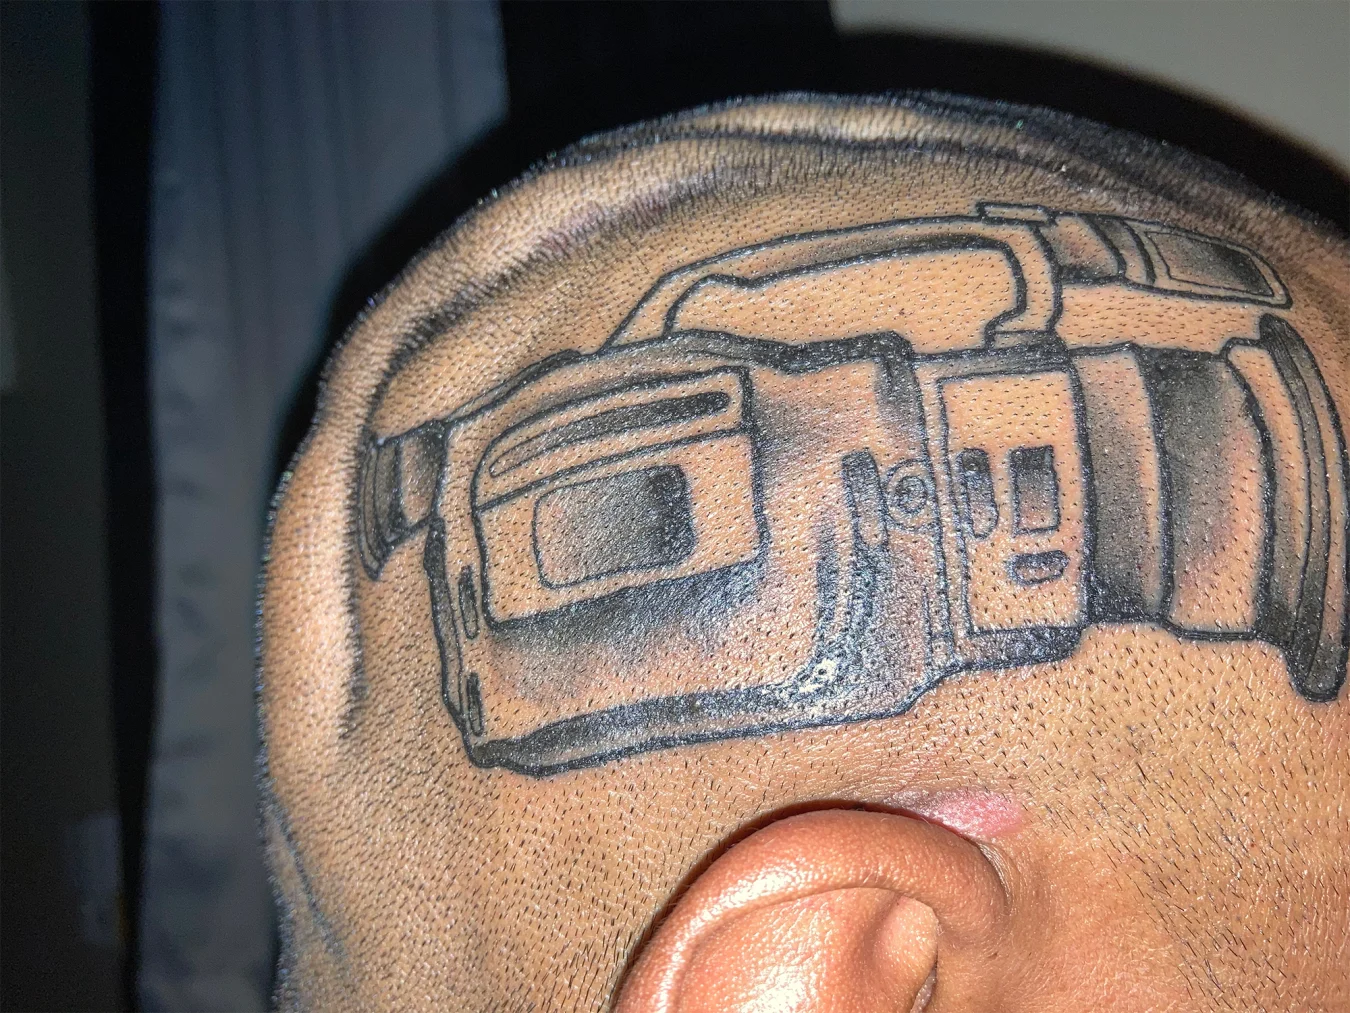 A man with a tattoo of the Sony VX1000 video camera on his head.